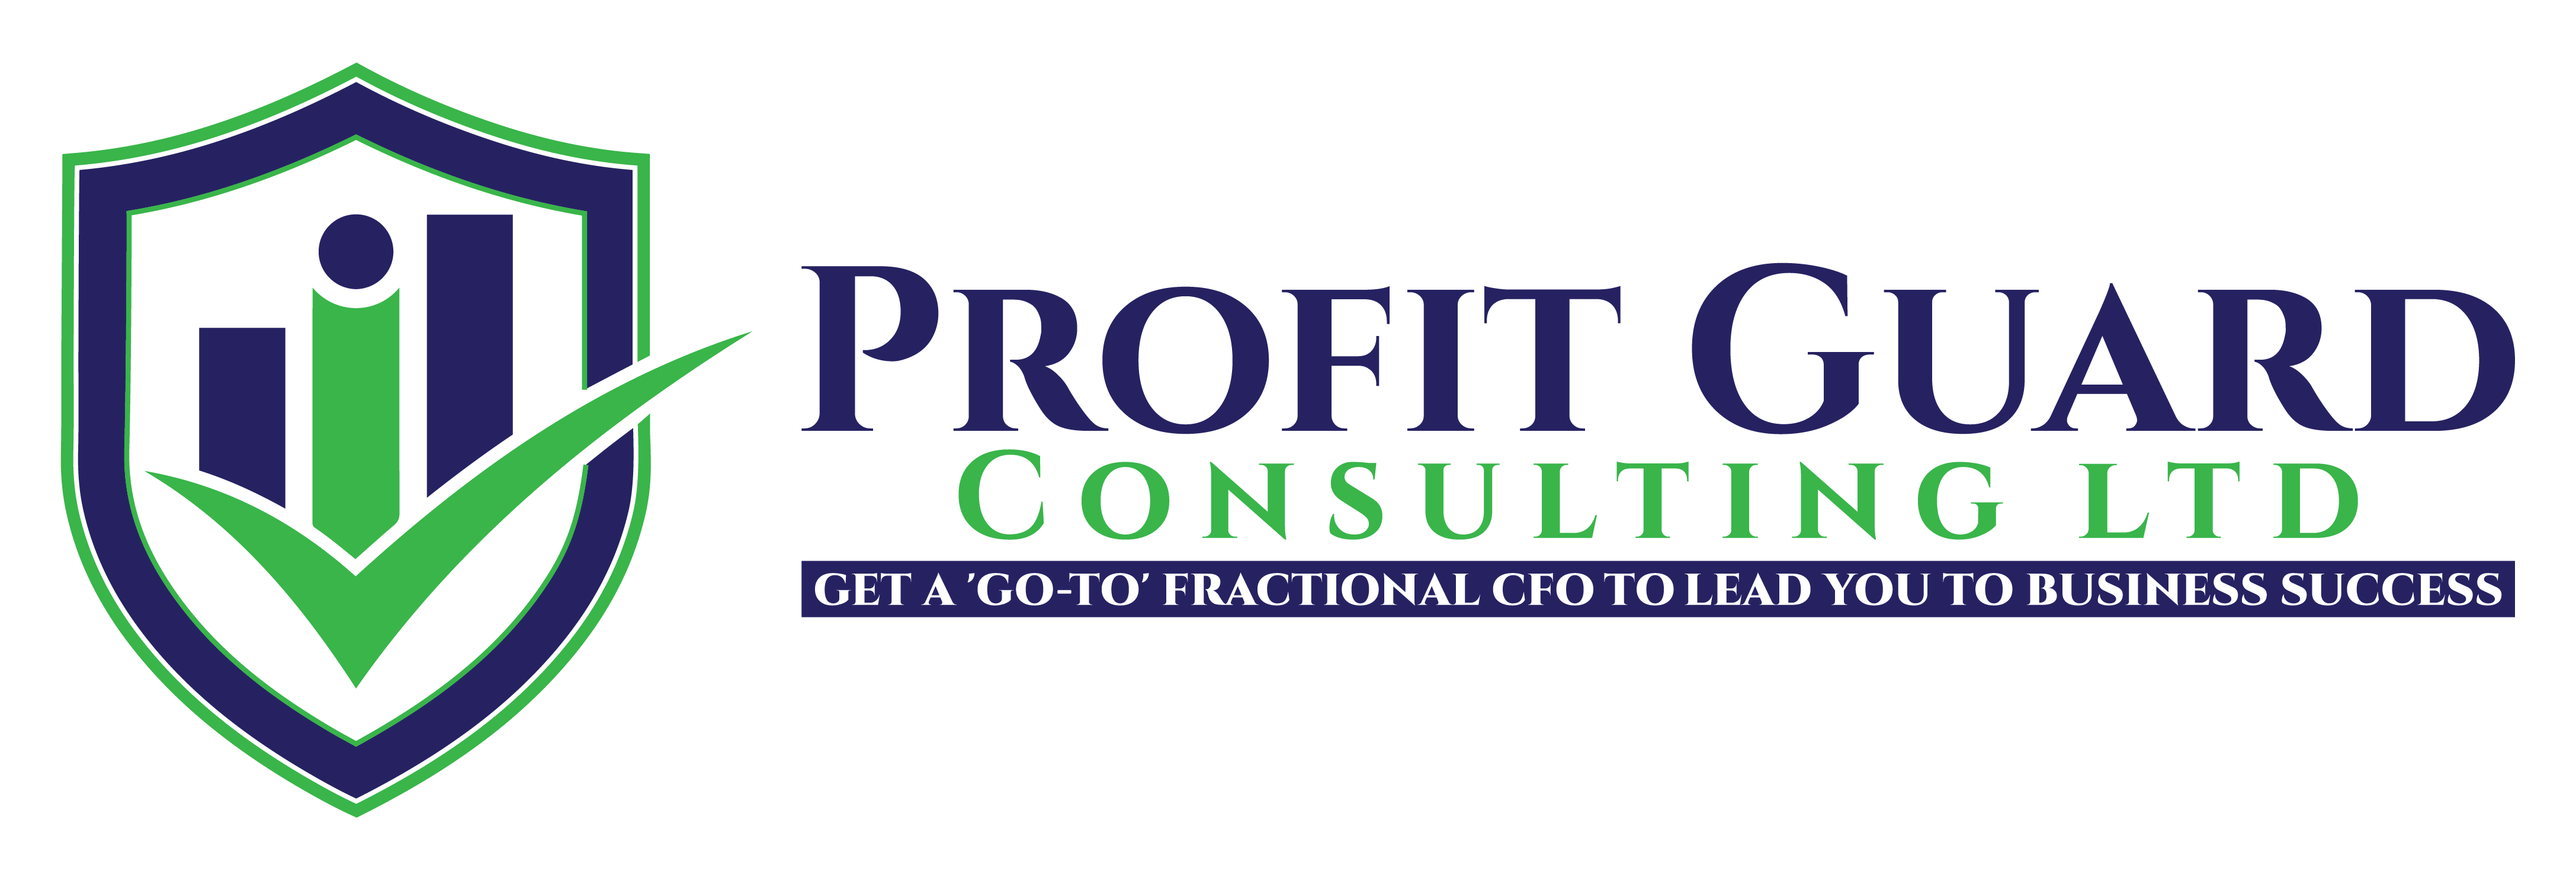 Profit Guard Consulting - Fractional CFO Services